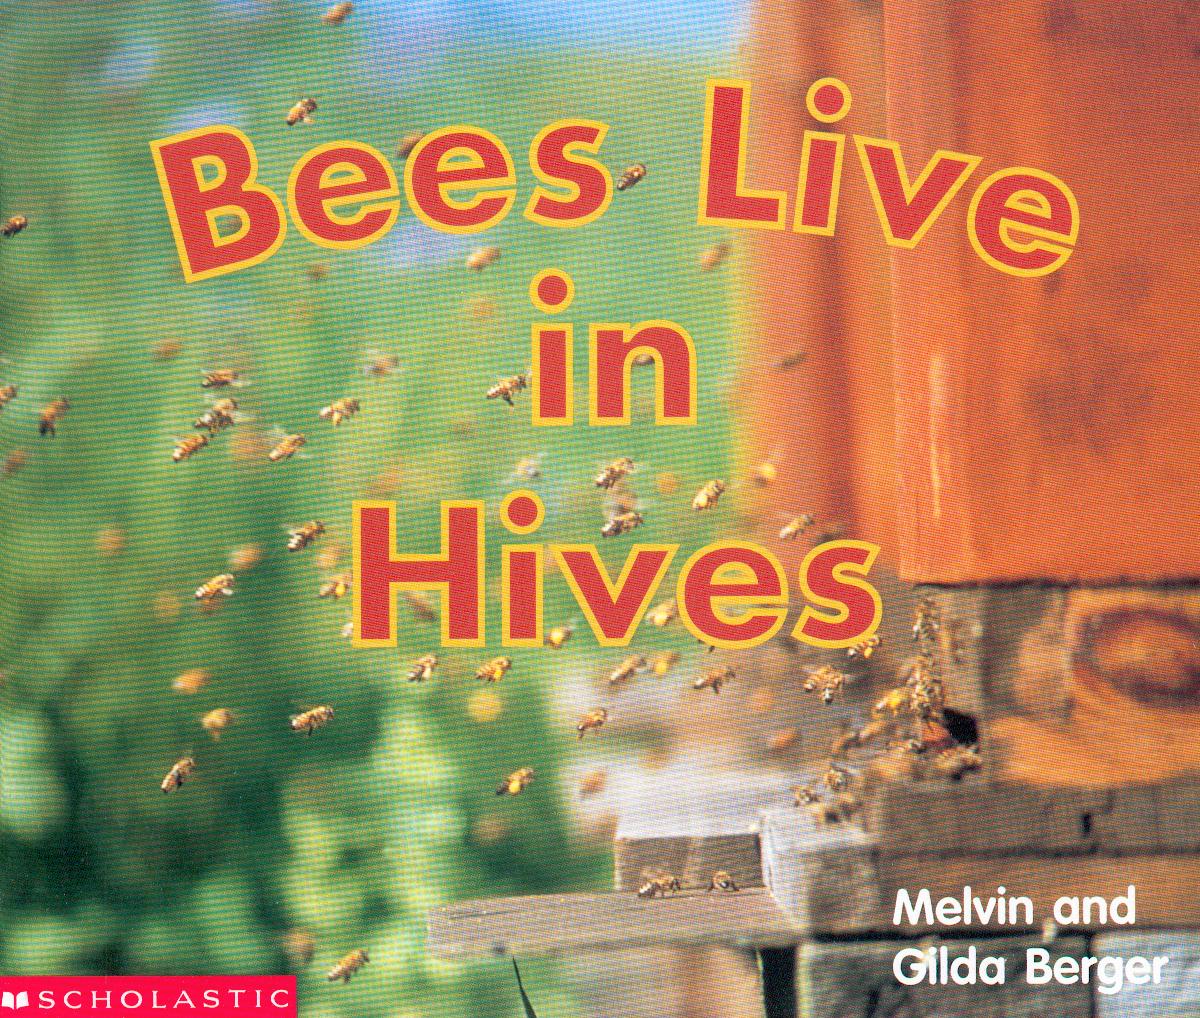 Bees live in hives / Melvin and Gilda Berger.